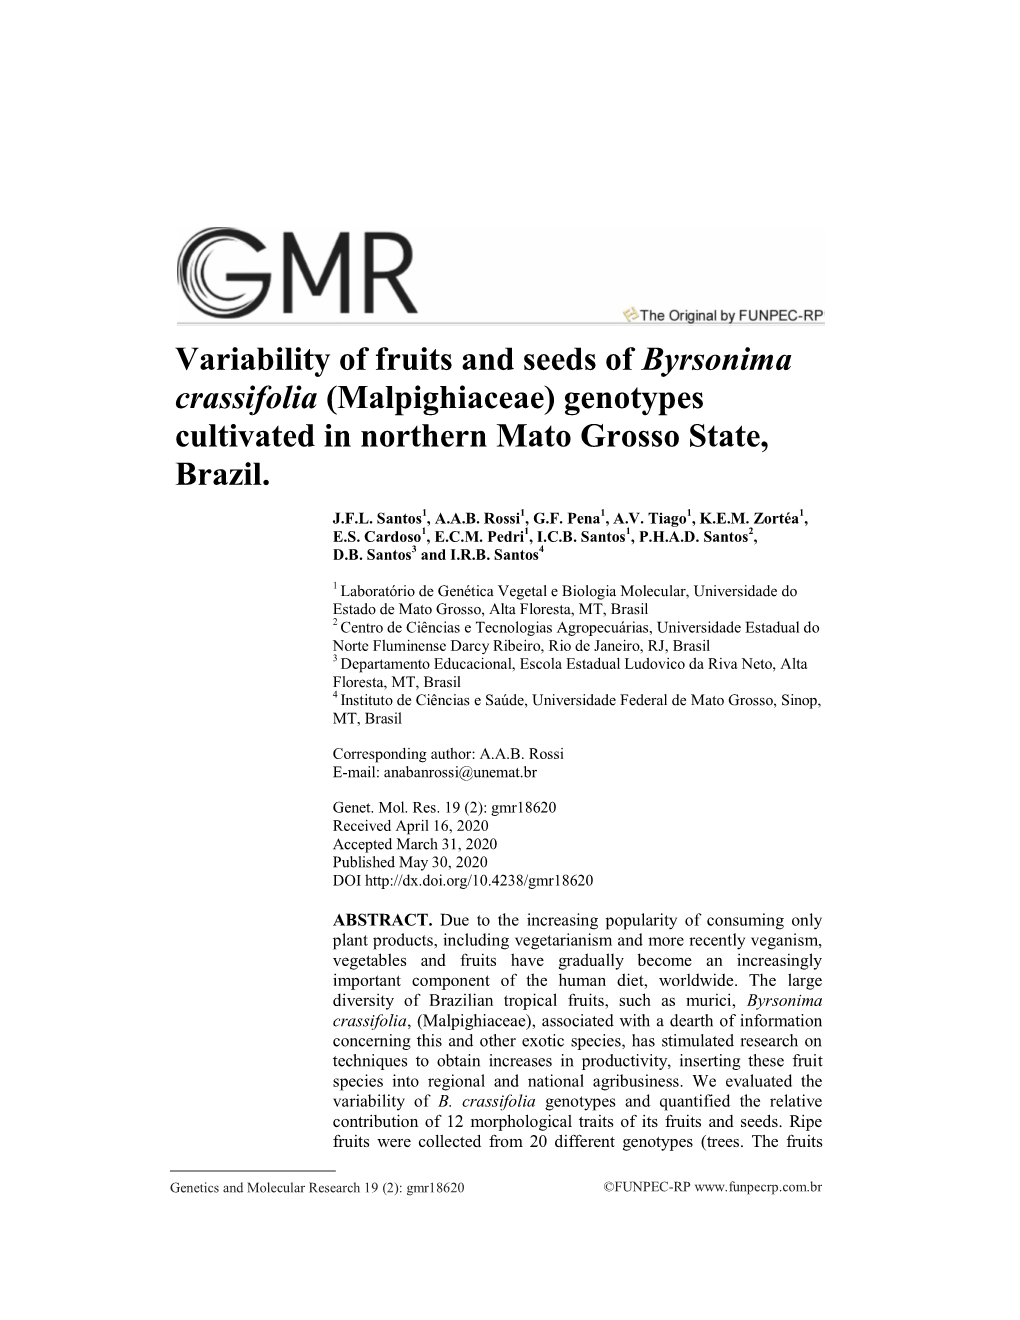 Variability of Fruits and Seeds of Byrsonima Crassifolia (Malpighiaceae) Genotypes Cultivated in Northern Mato Grosso State, Brazil